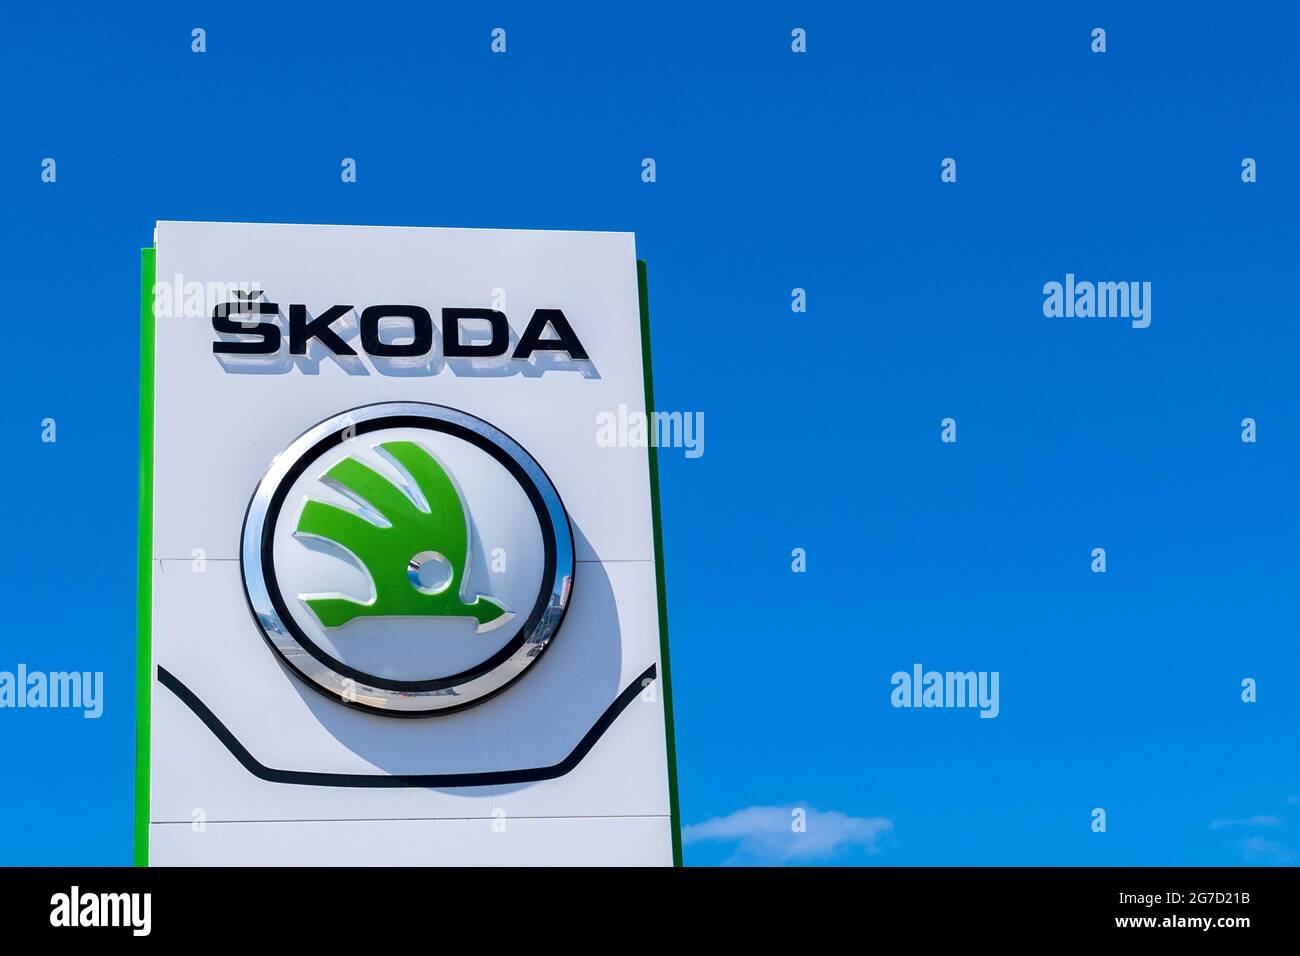 Tyumen, Russia-June 8, 2021: Facade of german car dealer with Skoda logo against clear cloudless blue sky Stock Photo